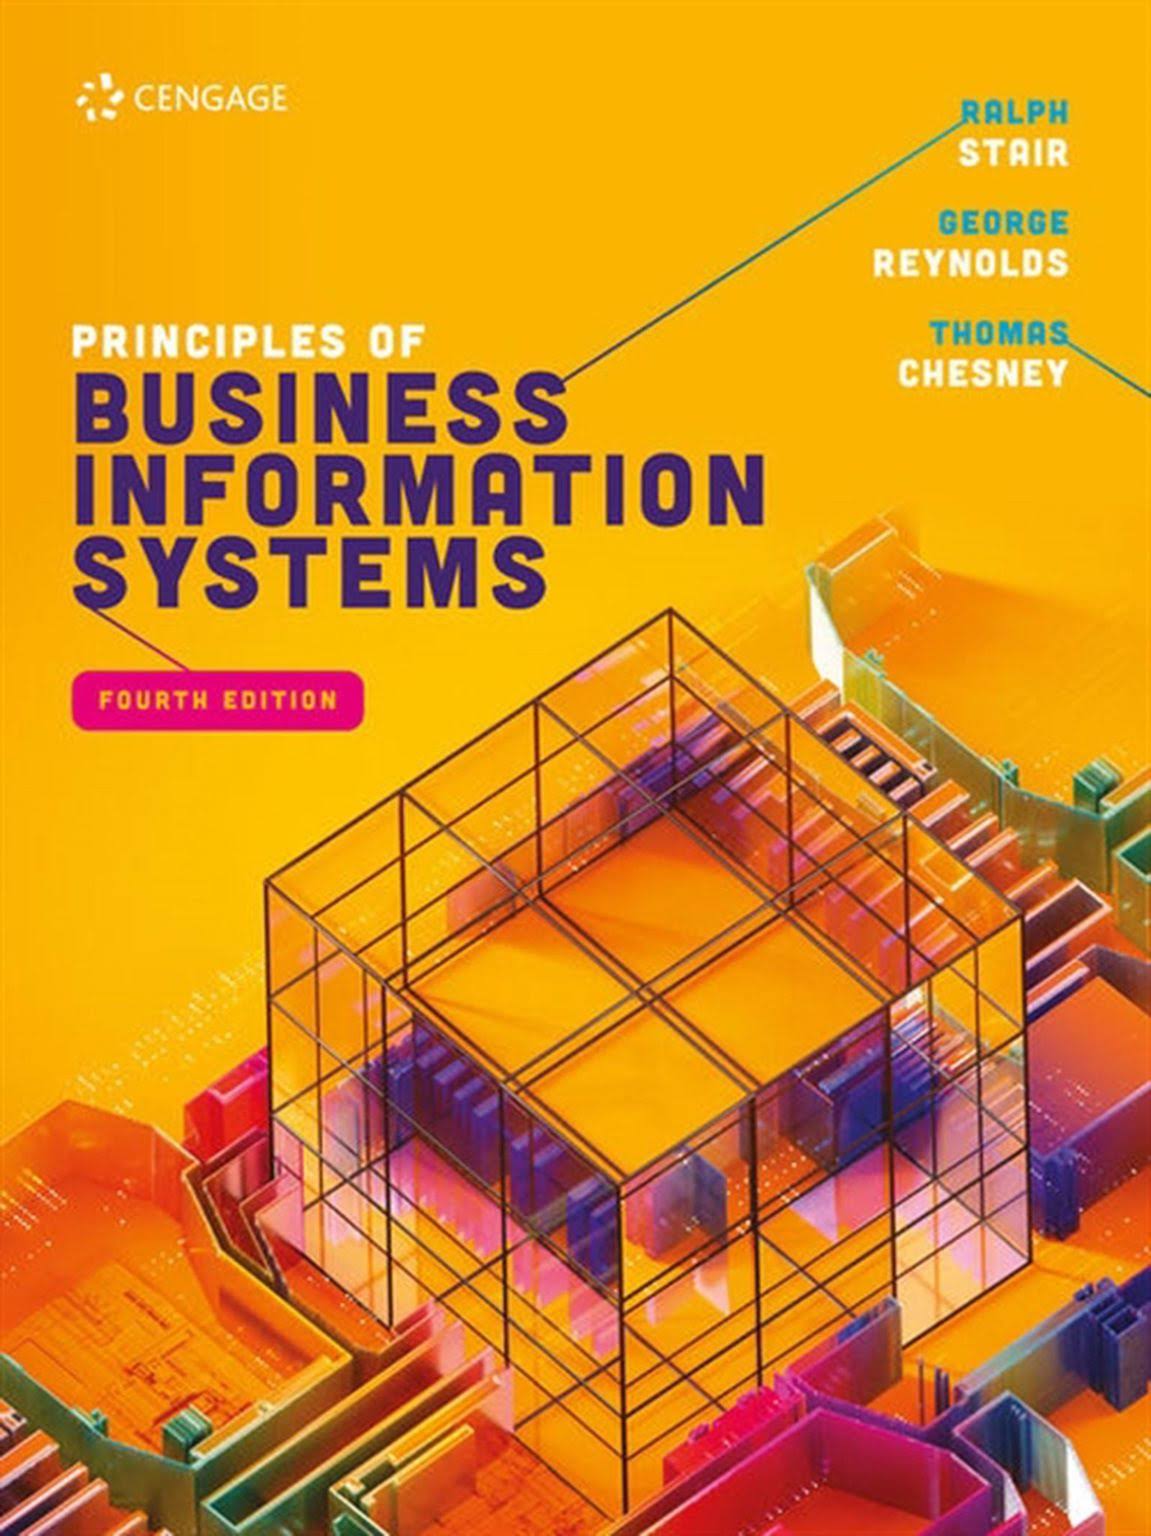 Principles of Business Information Systems by Ralph Stair